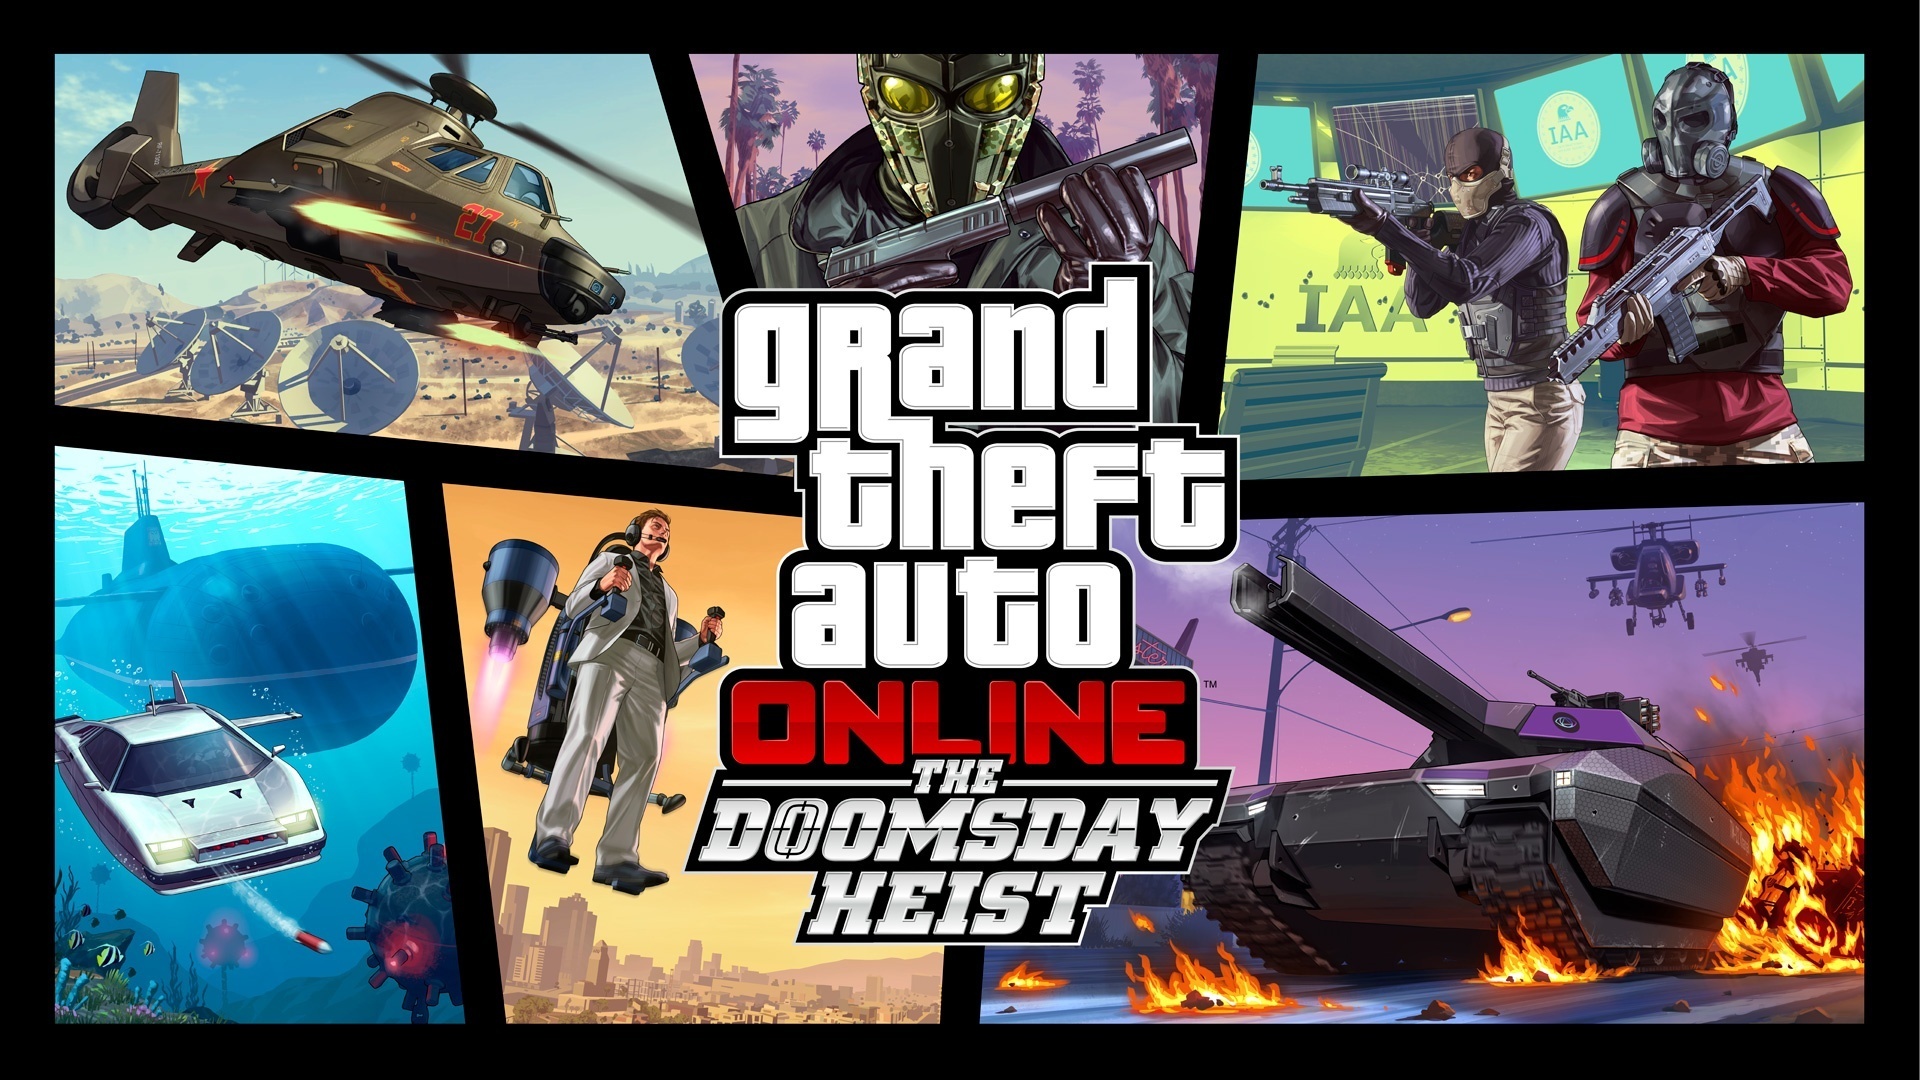 GTA Online’s Doomsday Heist is live now and features a $900,000 orbital cannon